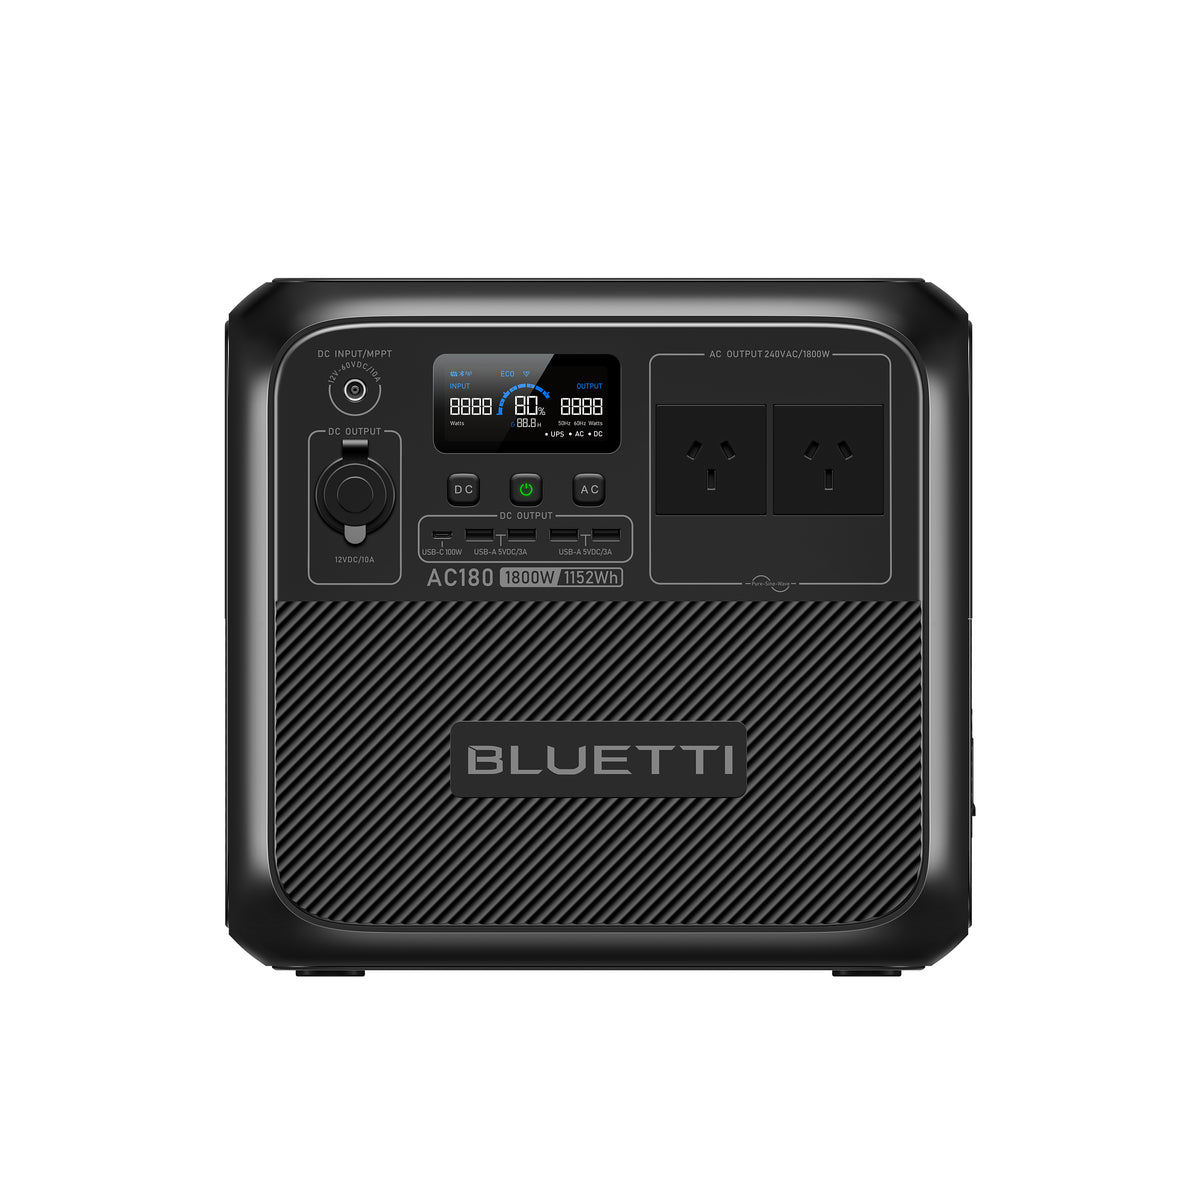 New power station from BLUETTI with 268Wh LiFePO4 battery - 9to5Toys